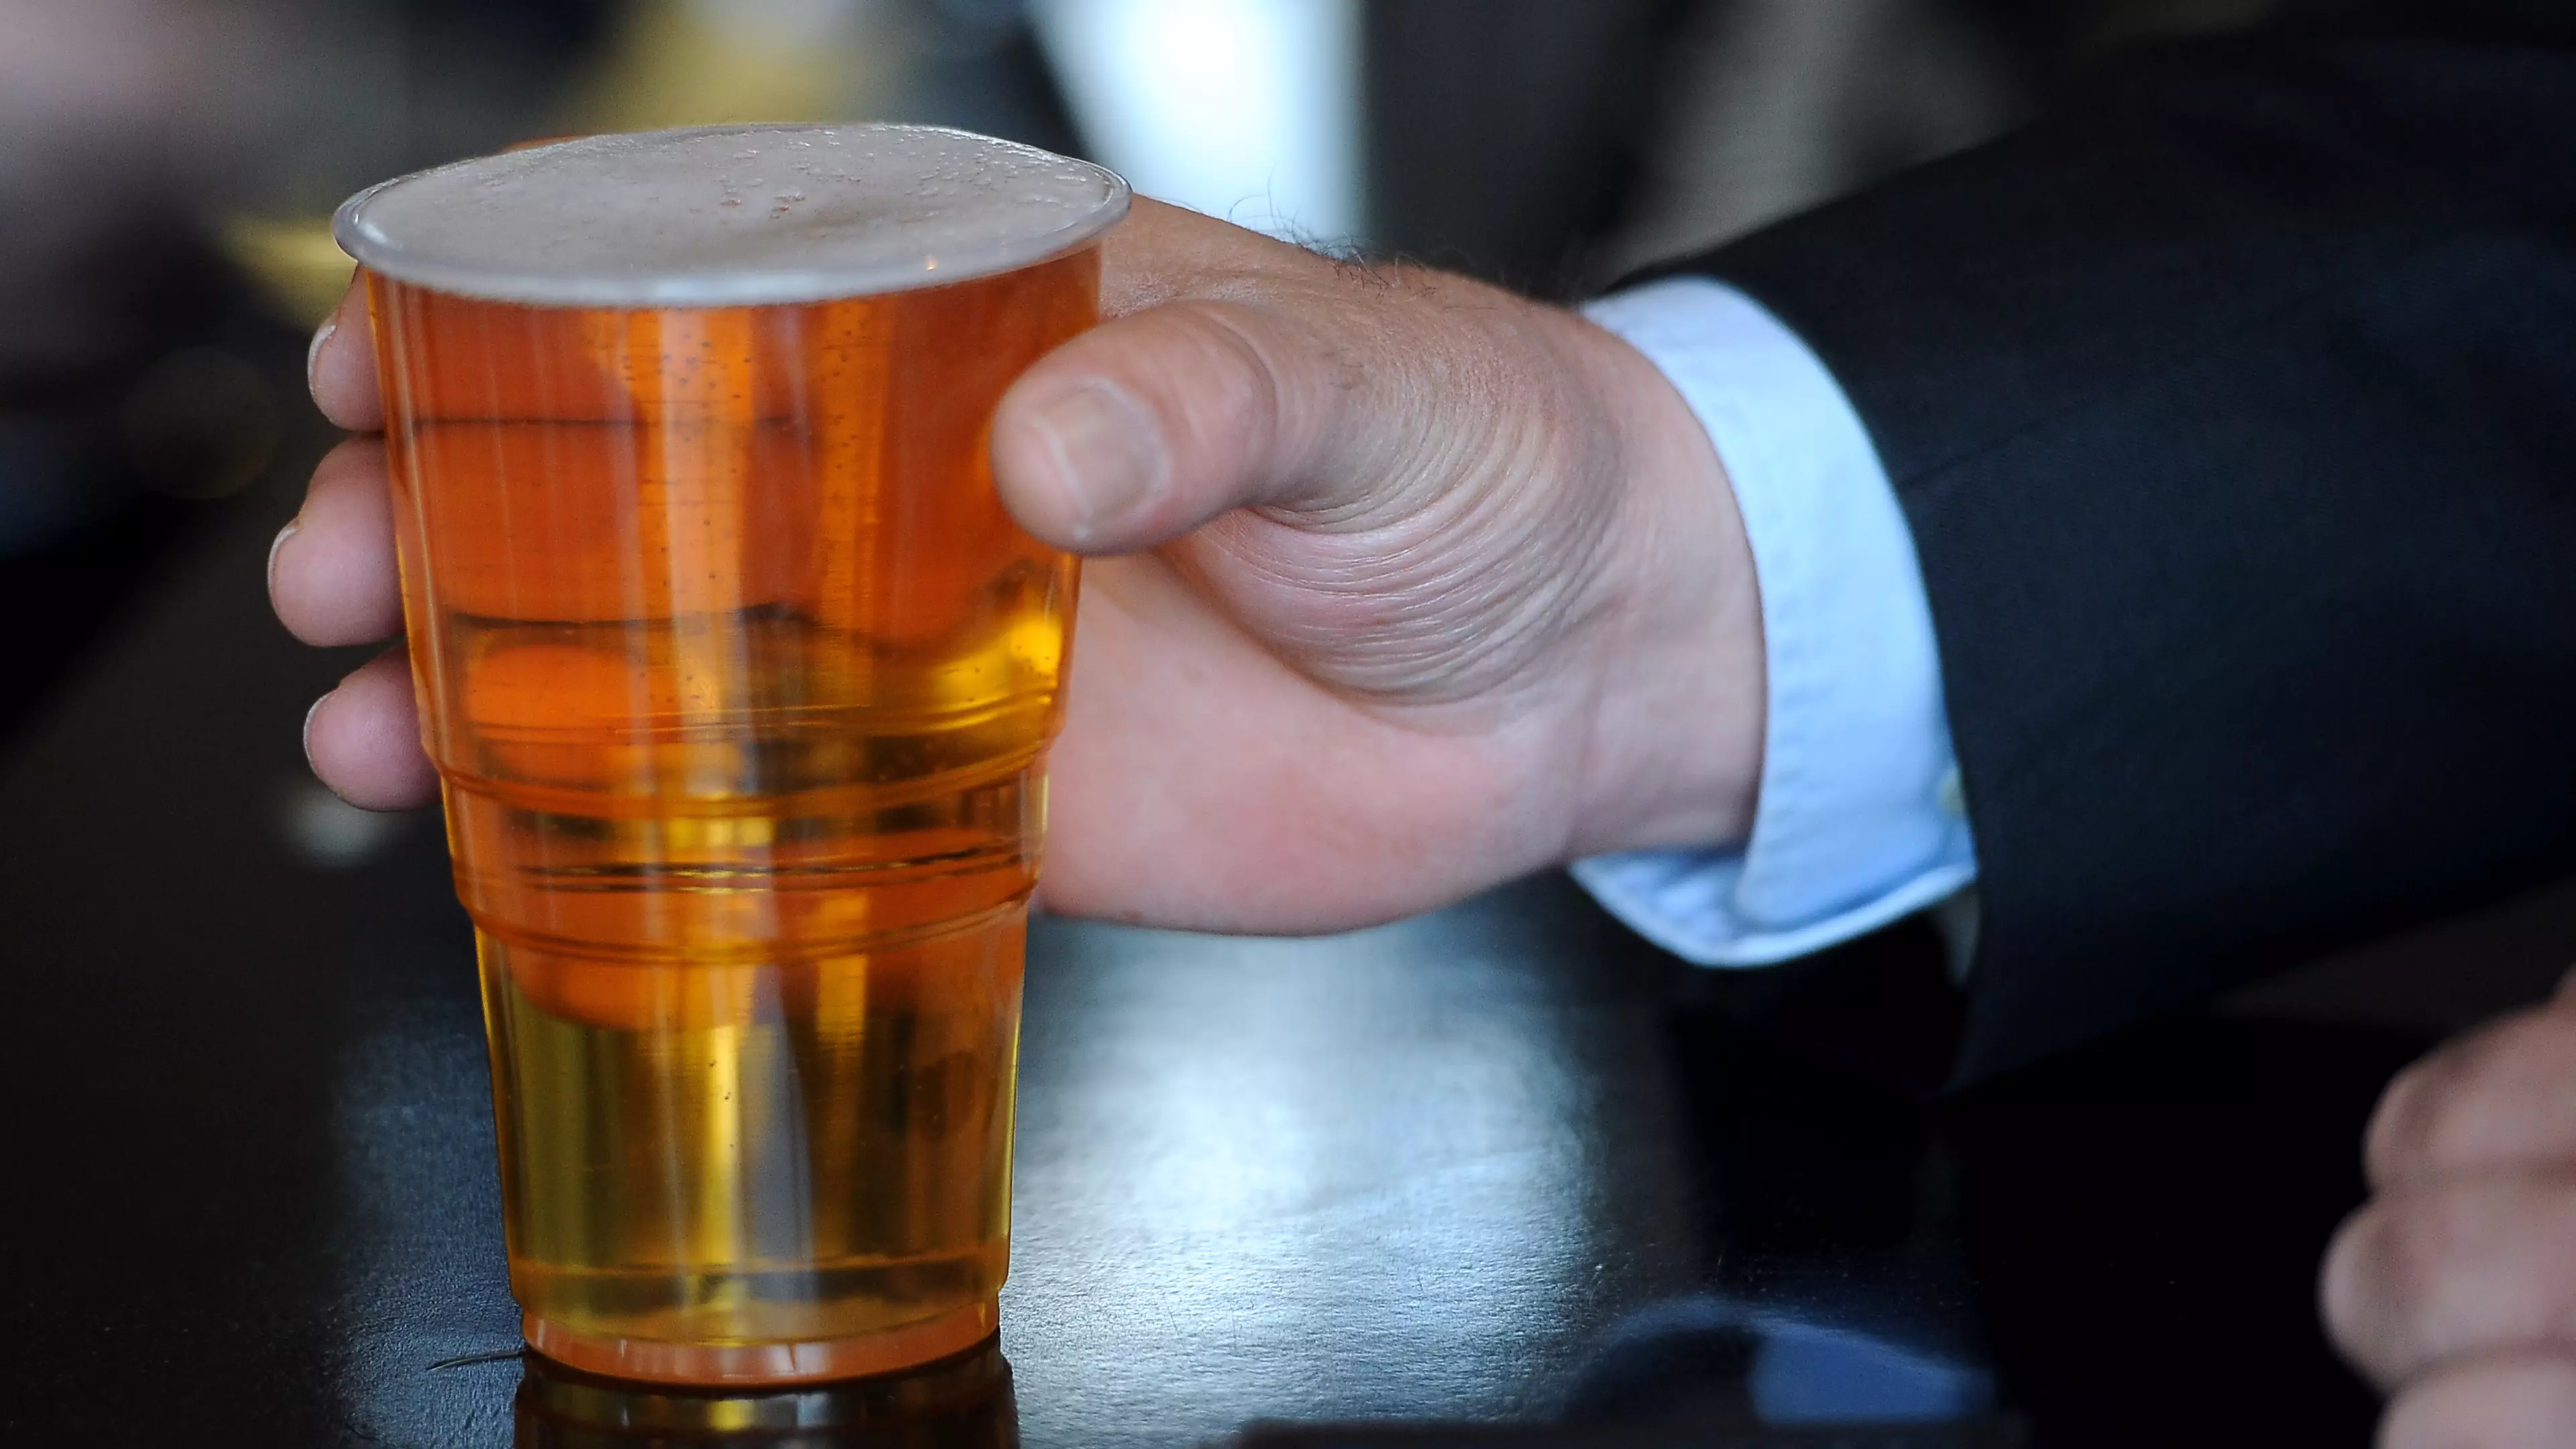 Drinking Alcohol Can Improve Memory Function, Says Study